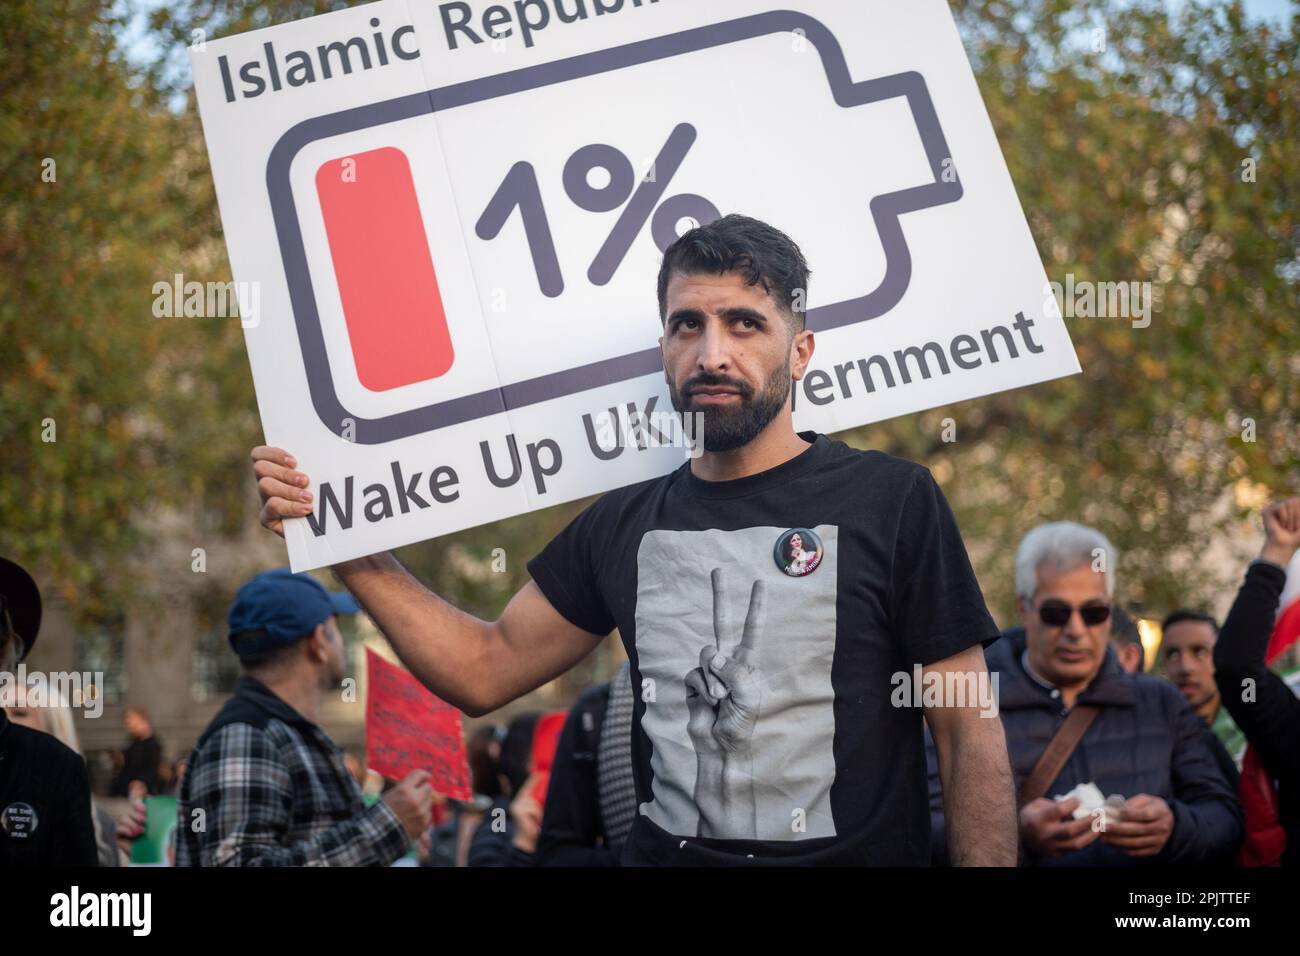 British-Iranian activist protesting against the Islamic Republic regime in Iran. Gathered outside Downing Street, demanding the closure of the Iranian Embassy in London. Stock Photo